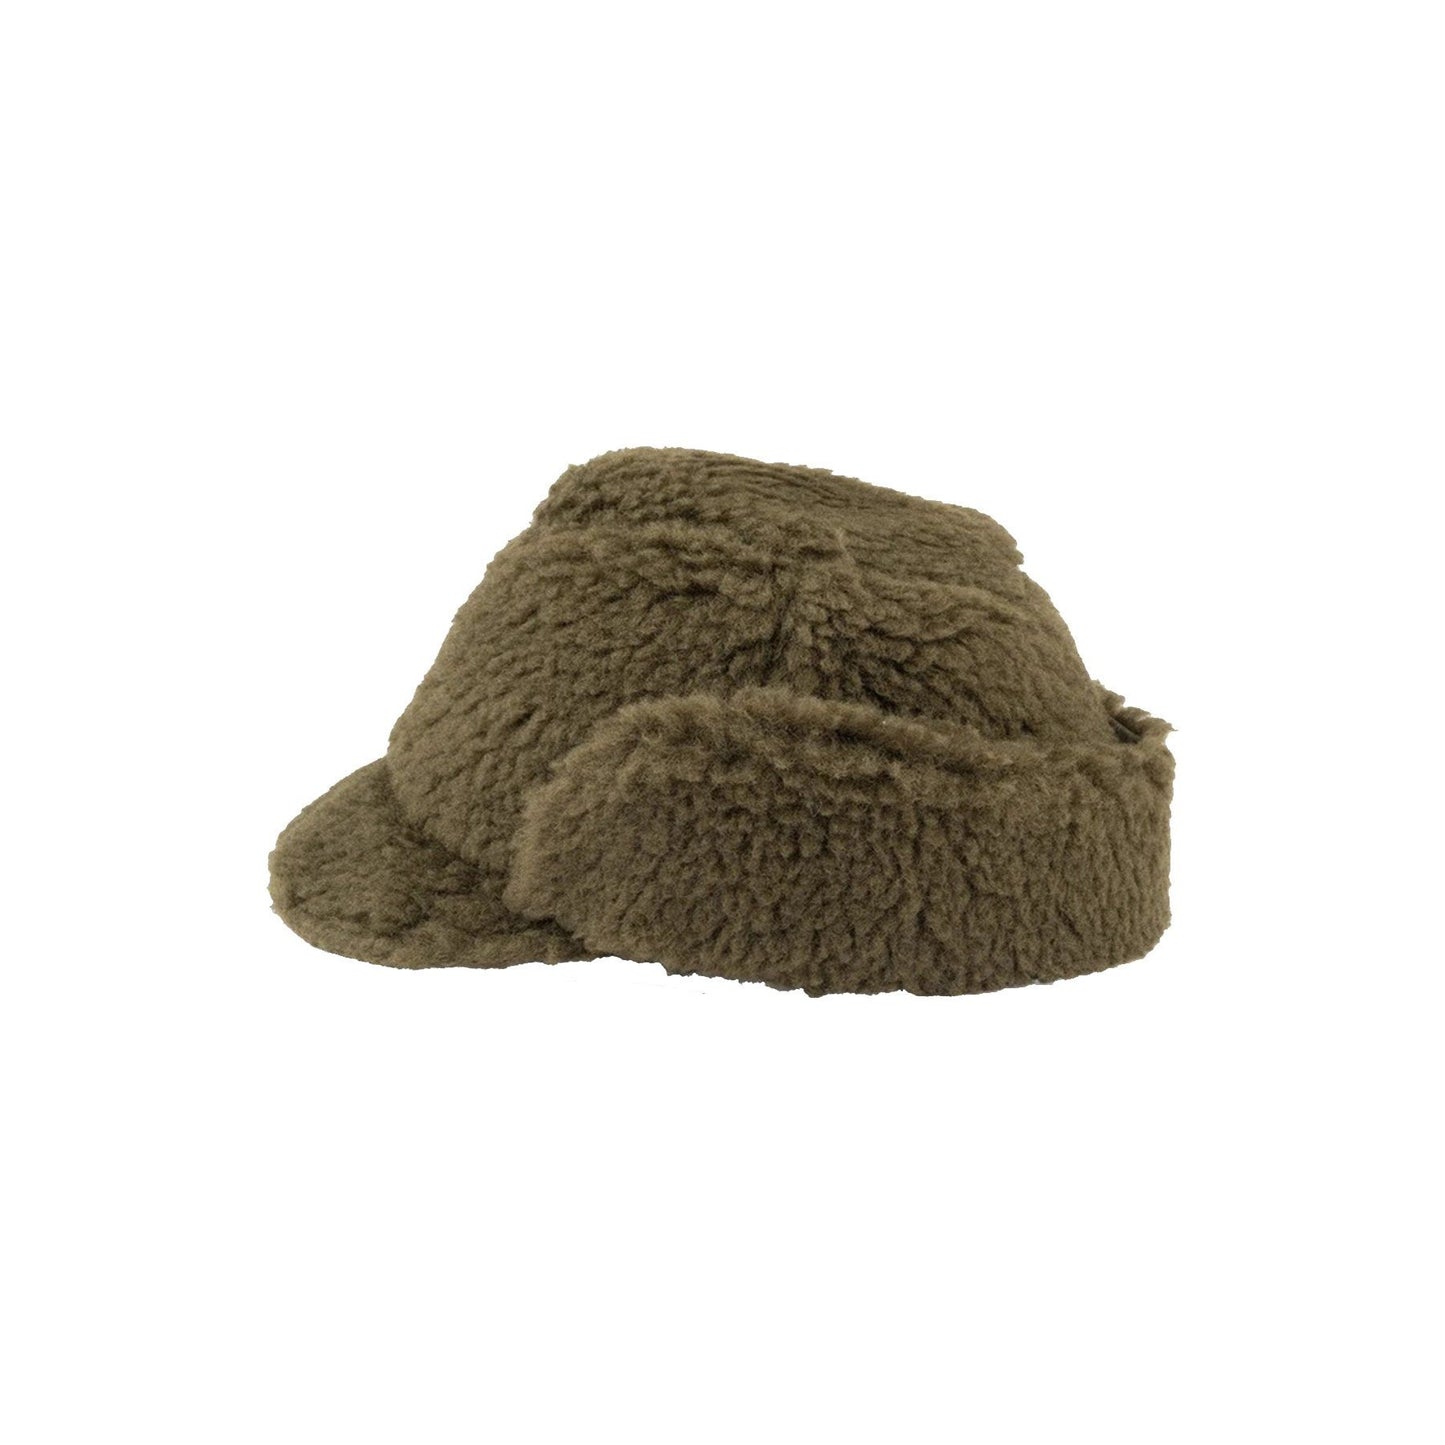 Cableami Winter Hat Boa Sherpa Cap With Earflap, Olive